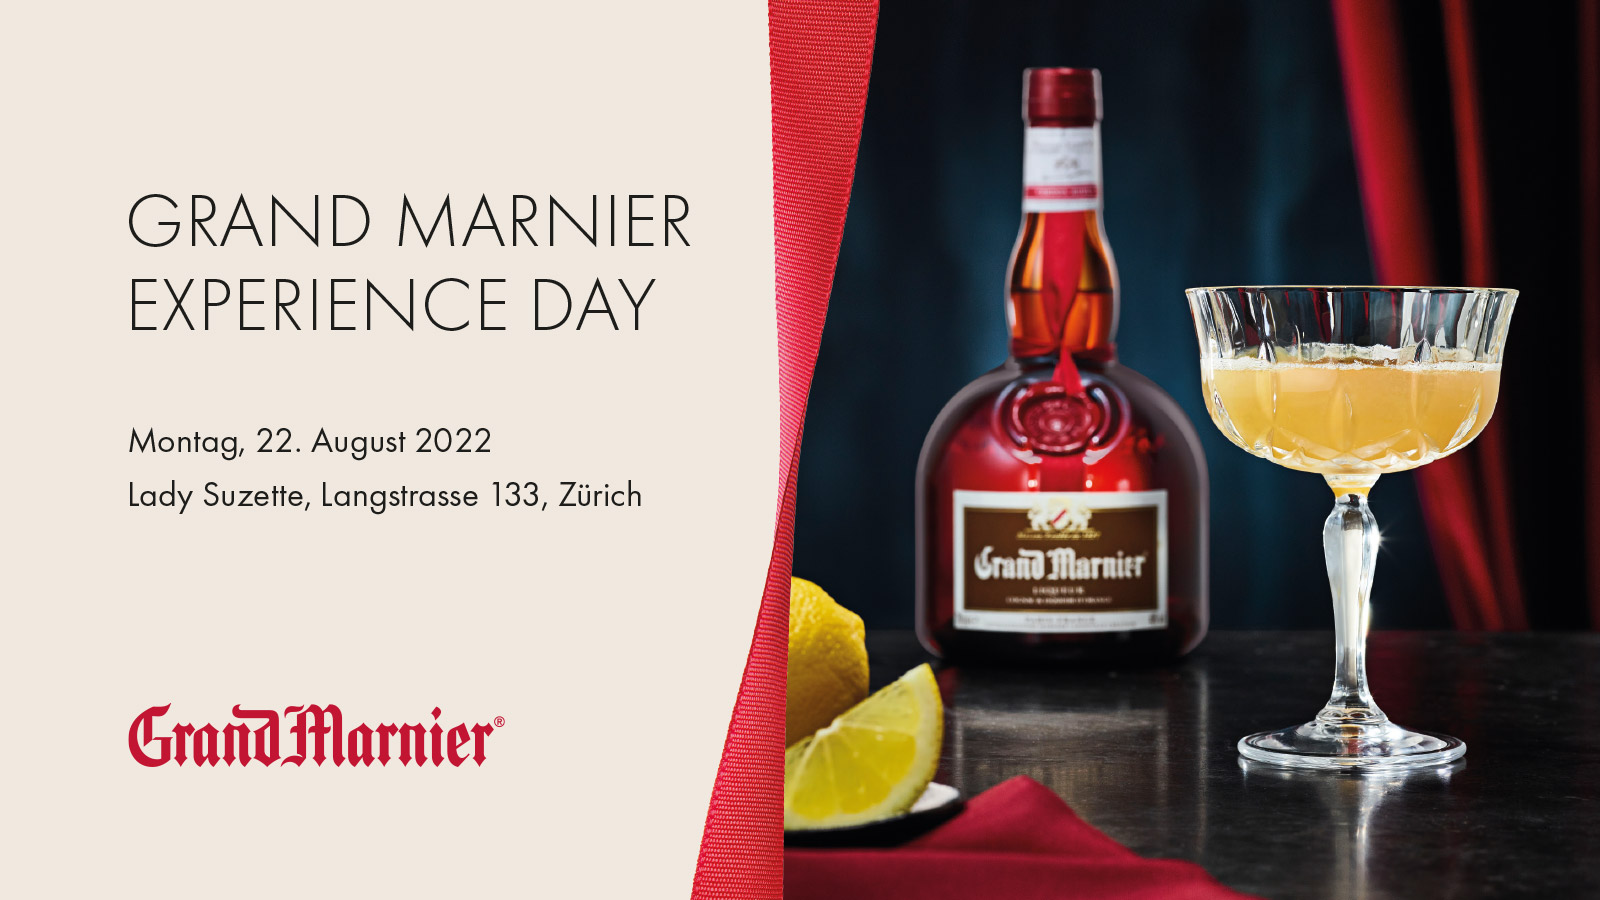 Grand Marnier Experience Day 2022